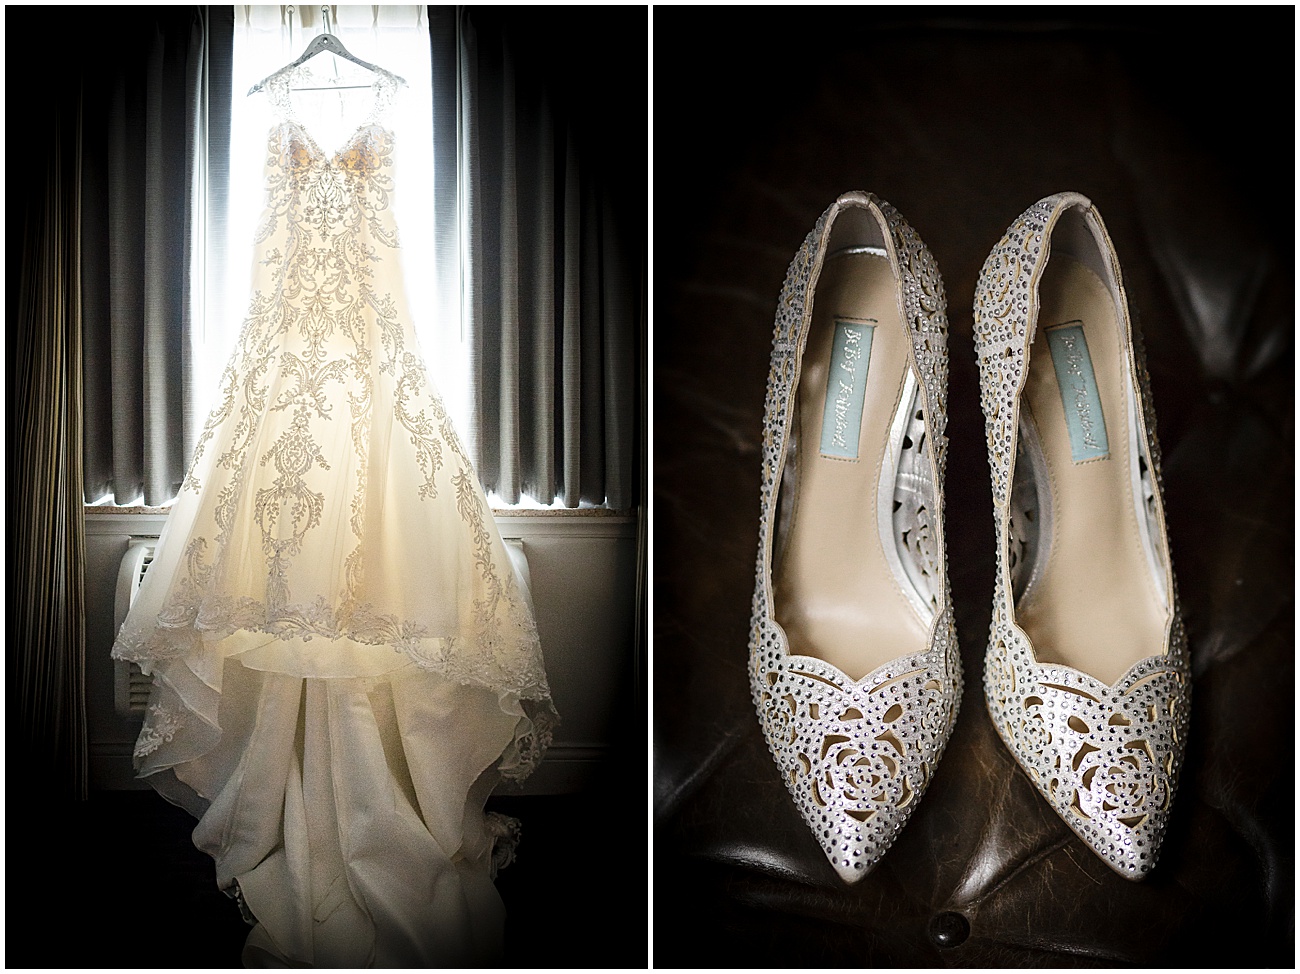 Bride Dress and Shoes at Eolia Mansion Wedding in Waterford CT by Jamerlyn Brown Photography